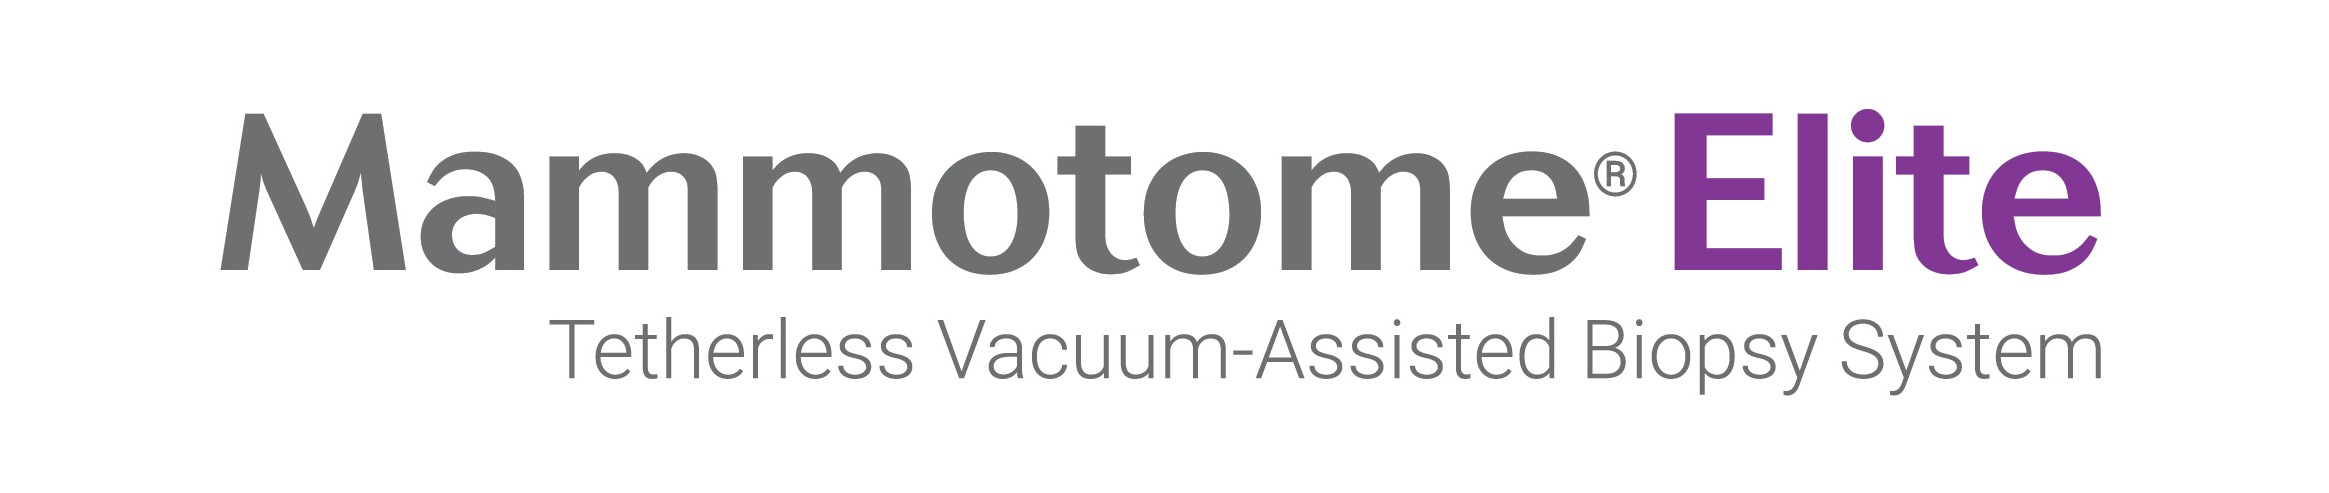 Mammotome Elite Tetherless Vacuum-Assisted Biopsy System Logo